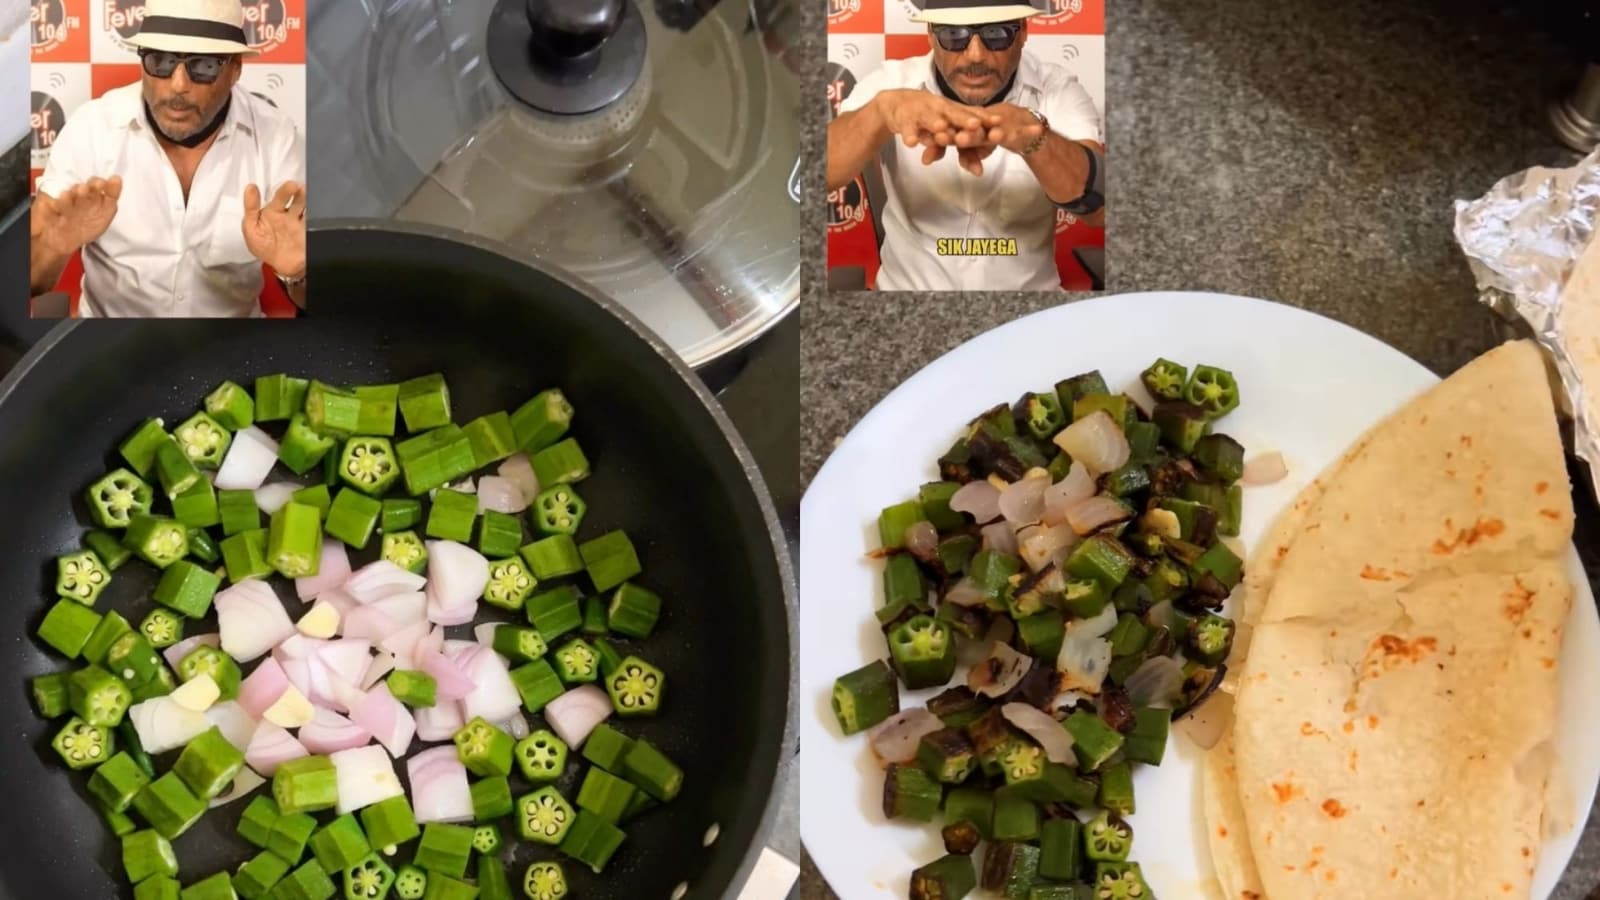 Food vloggers try Jackie Shroff’s viral bhindi recipe. Watch to know if it is a hit or a miss